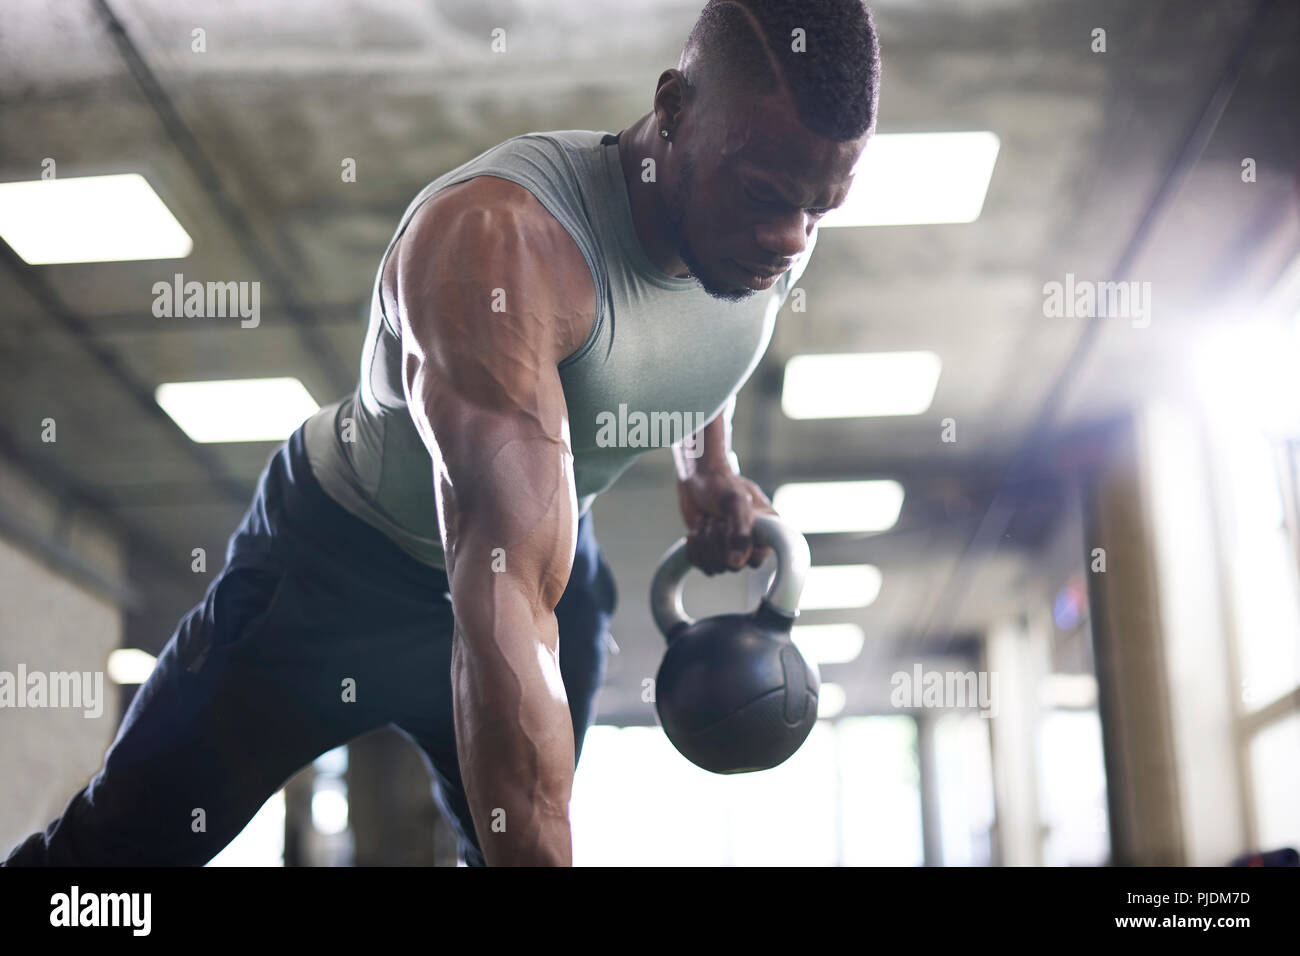 Man doing plank with kettlebells in gym Stock Photo